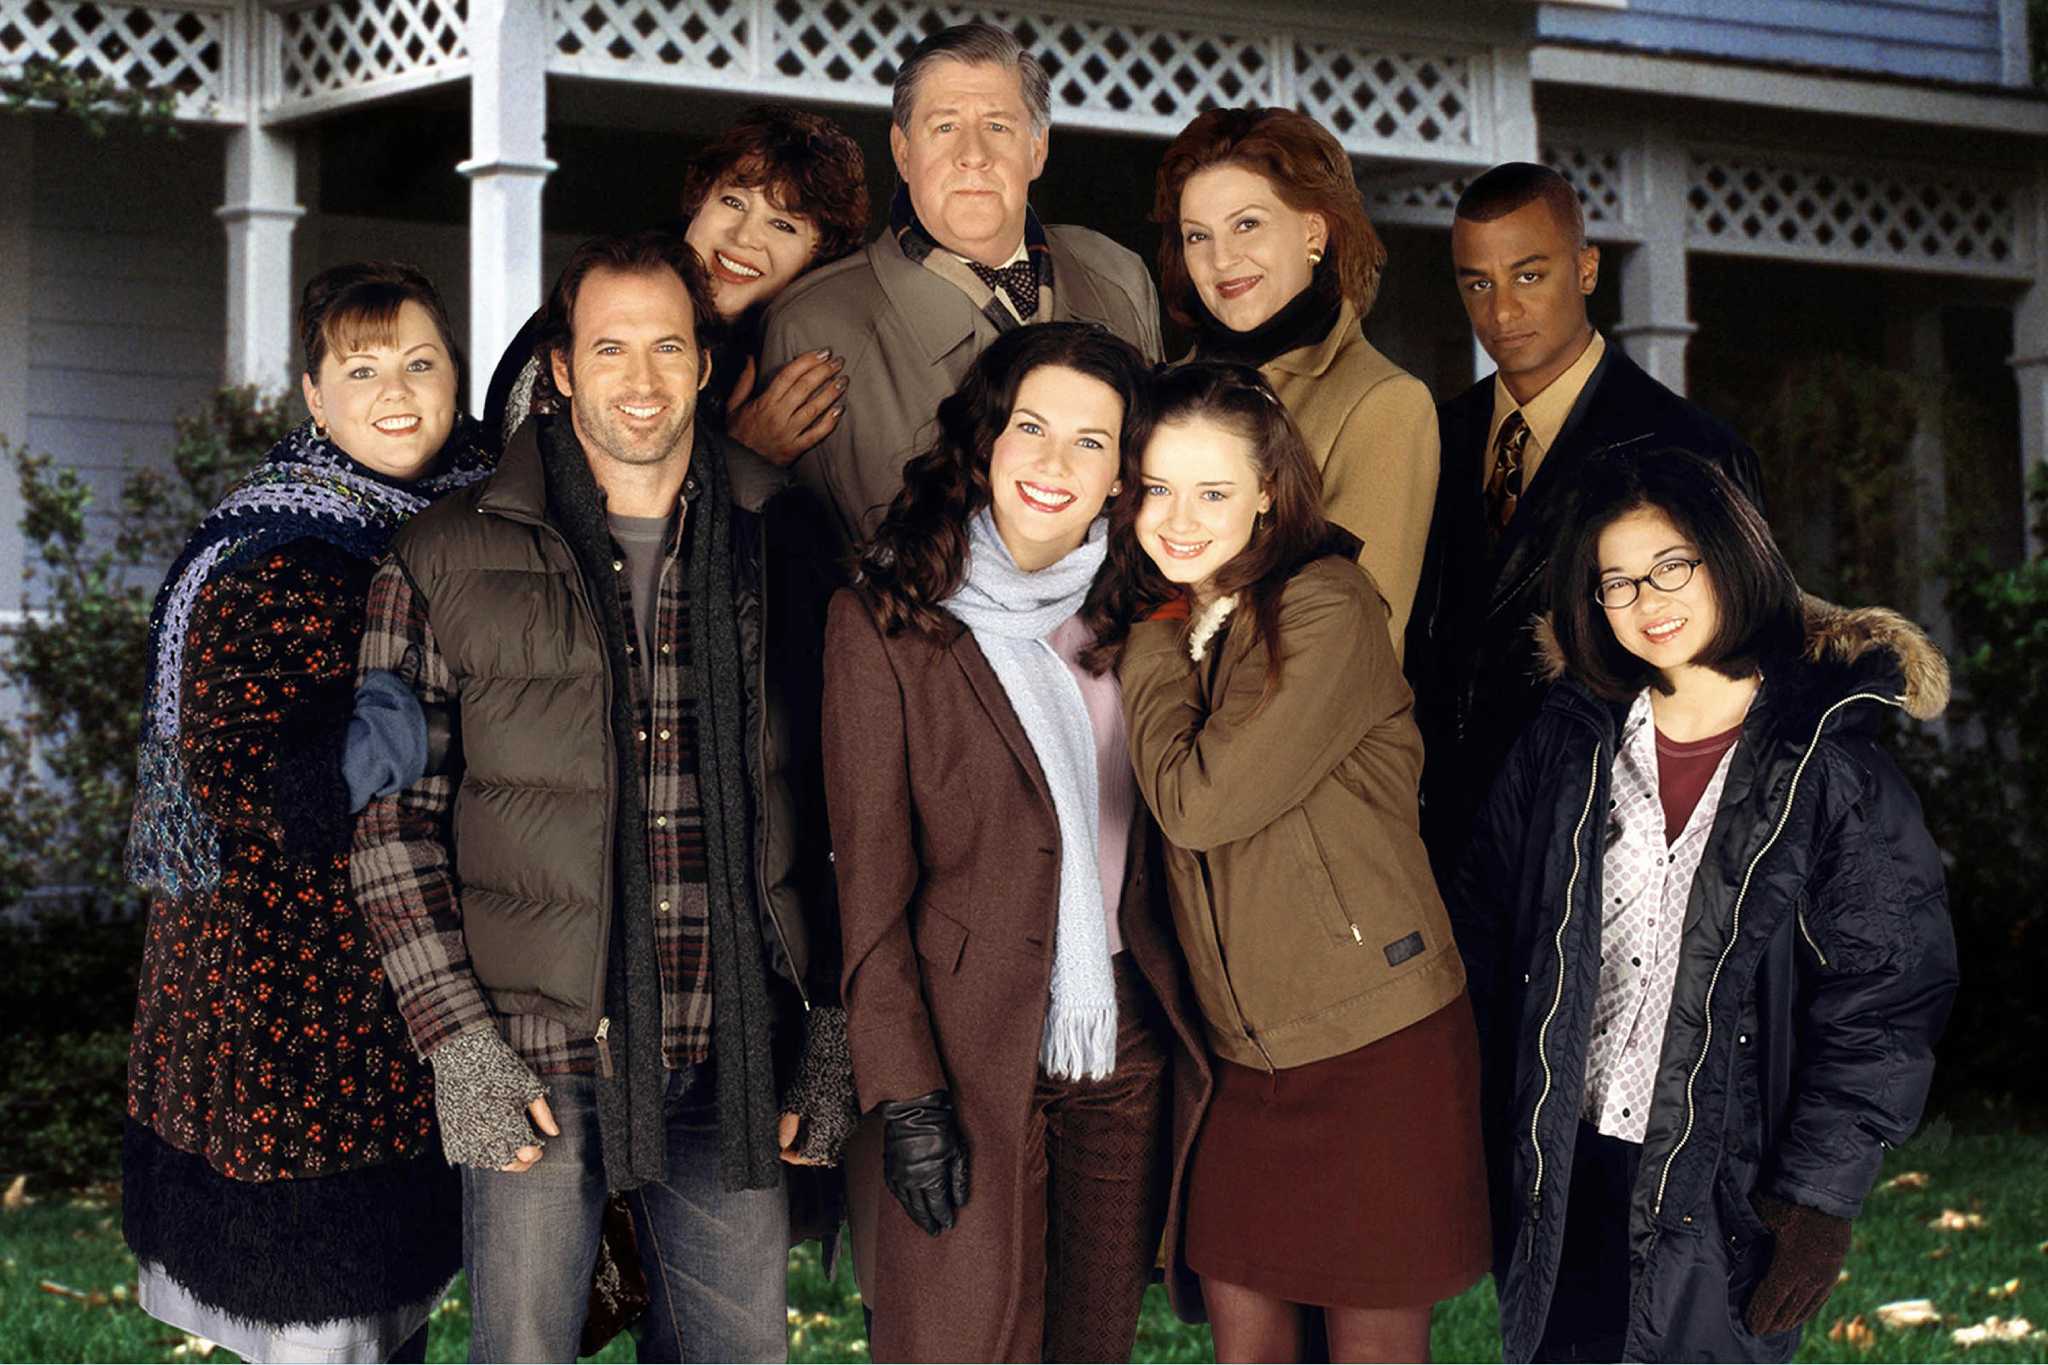 Connecticut town will transform into Stars Hollow for 'Gilmore Girls